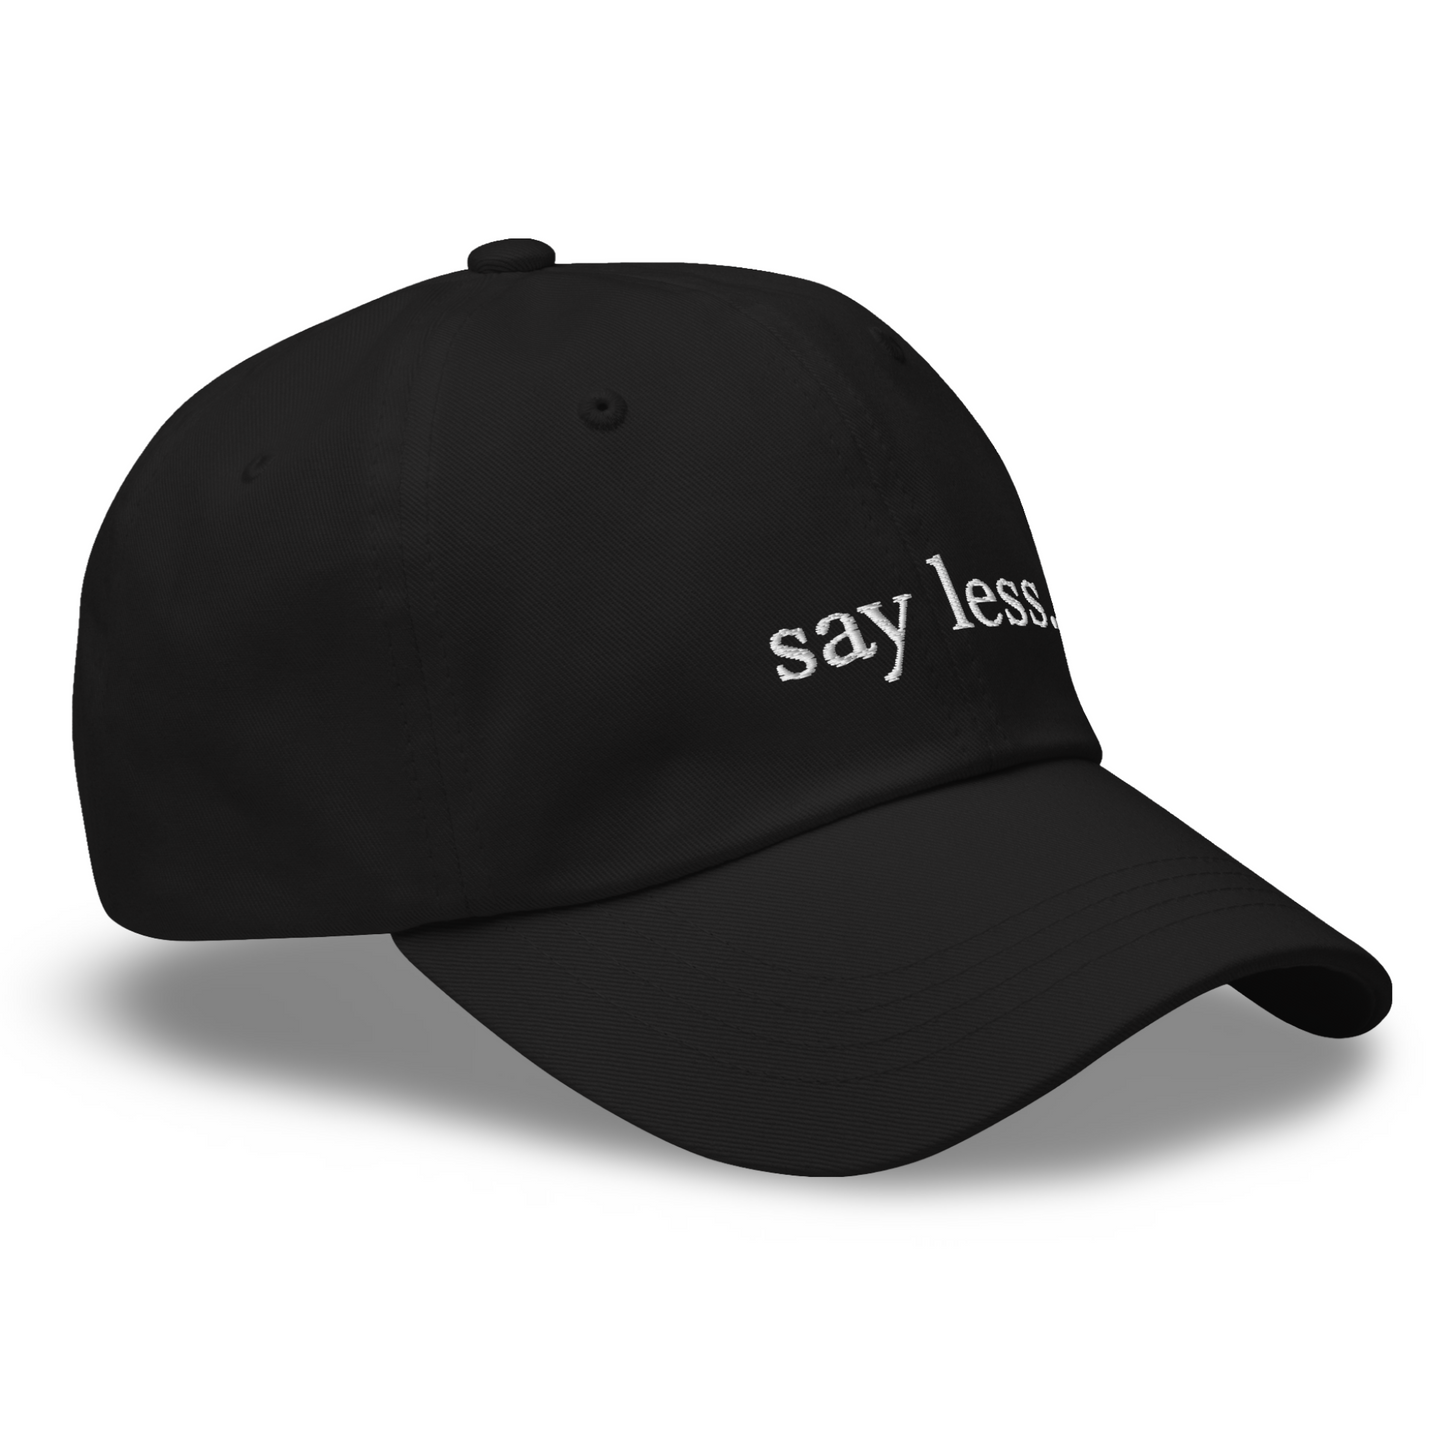 Embroidered "Say Less" Black Cap